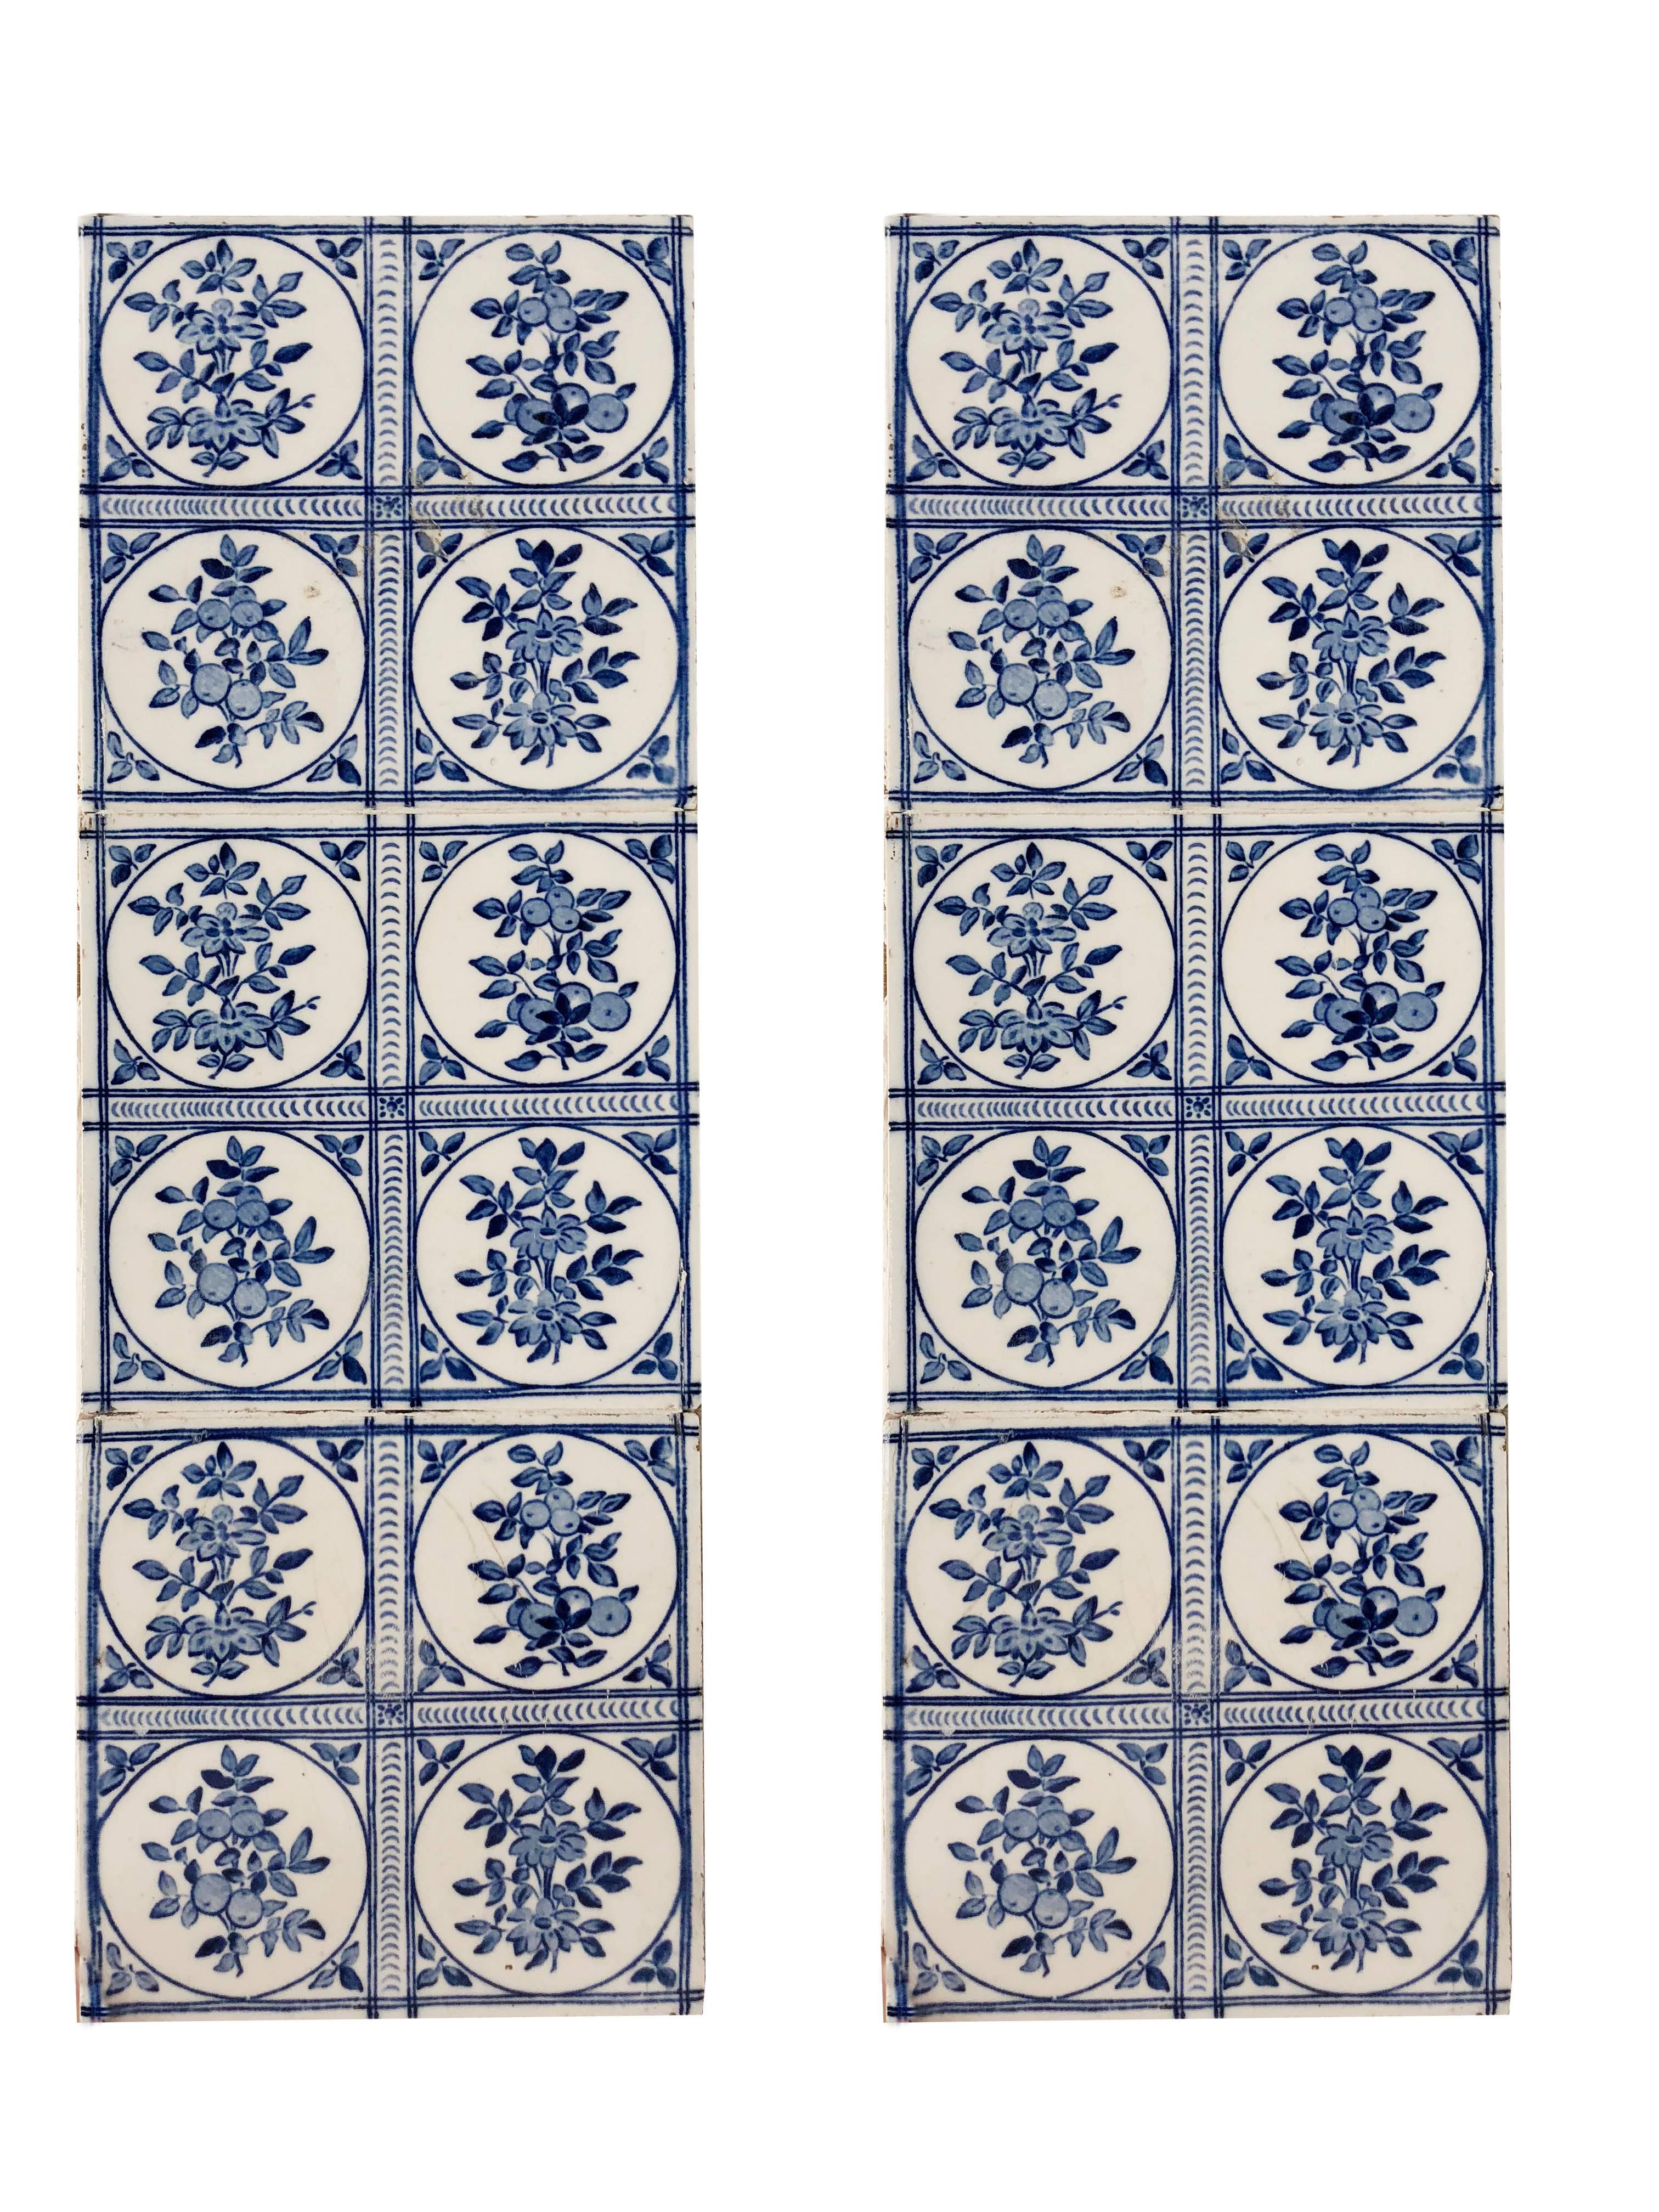 Mid-18th Century Collection of 18th Century Painted Delft Tile Scenes